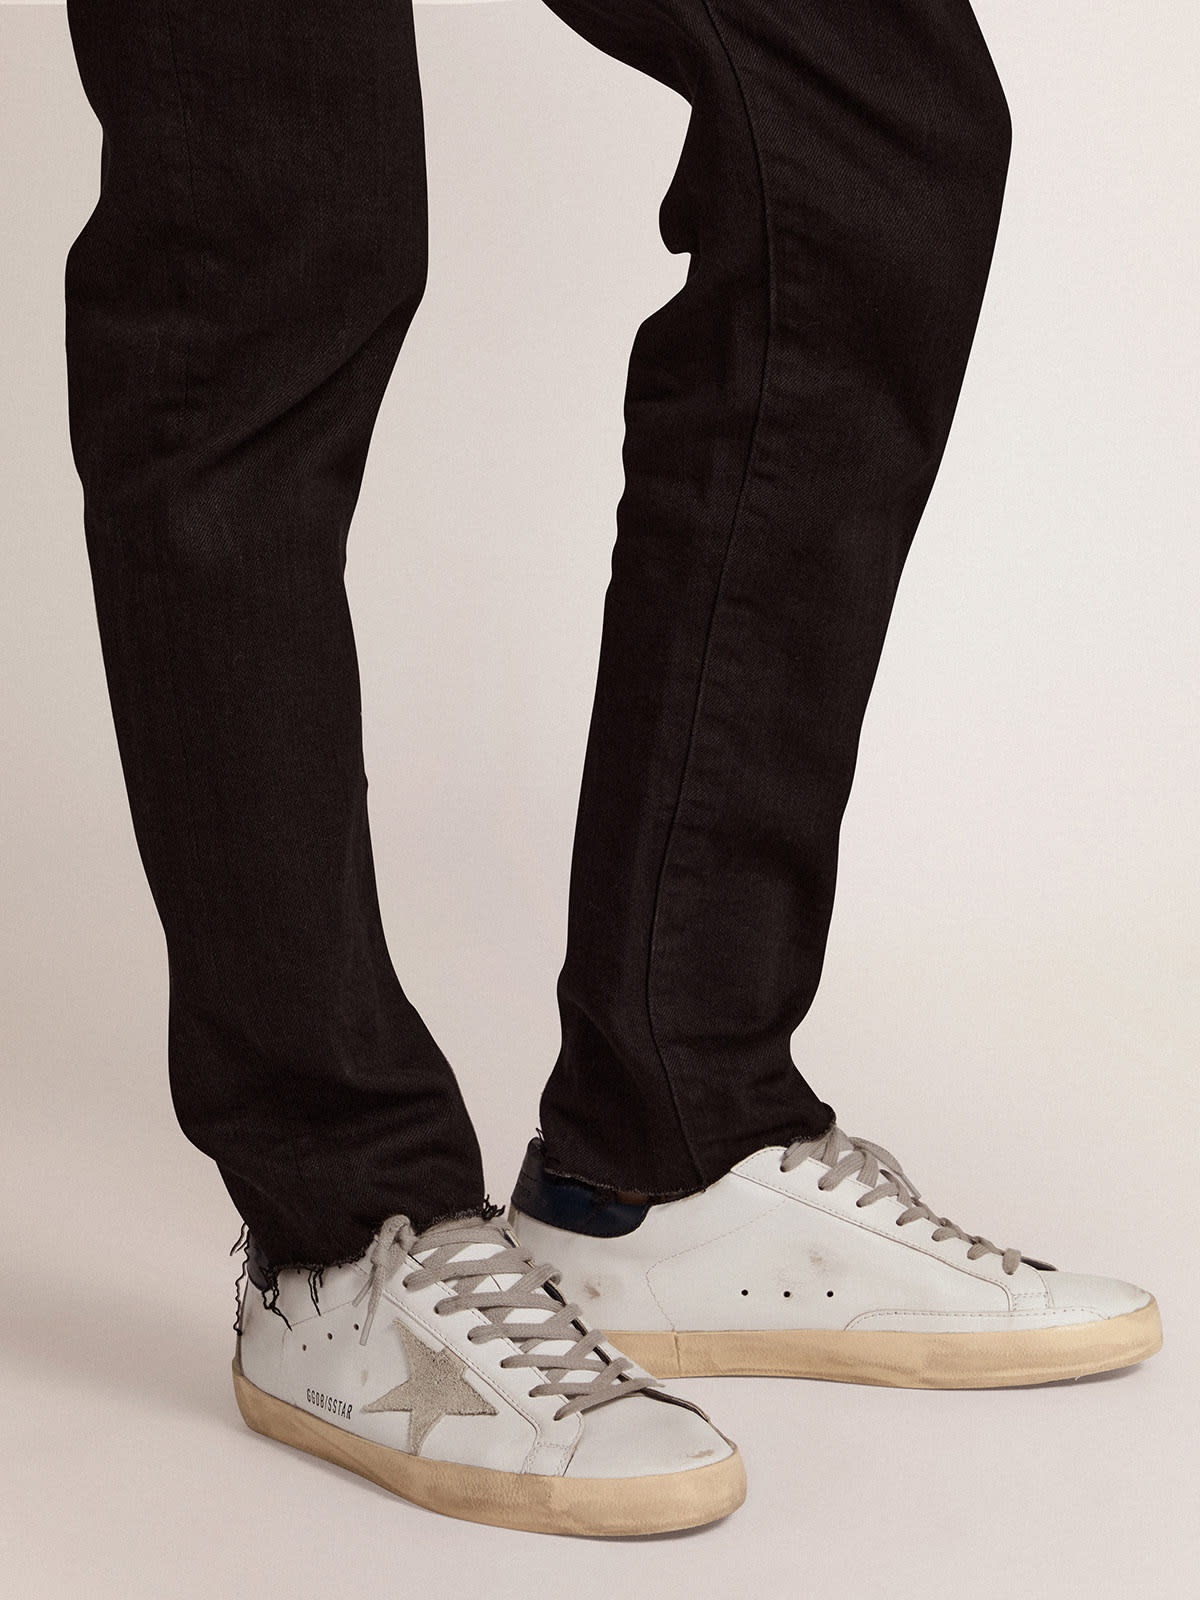 Men's Super-Star with suede star and blue heel tab - 3